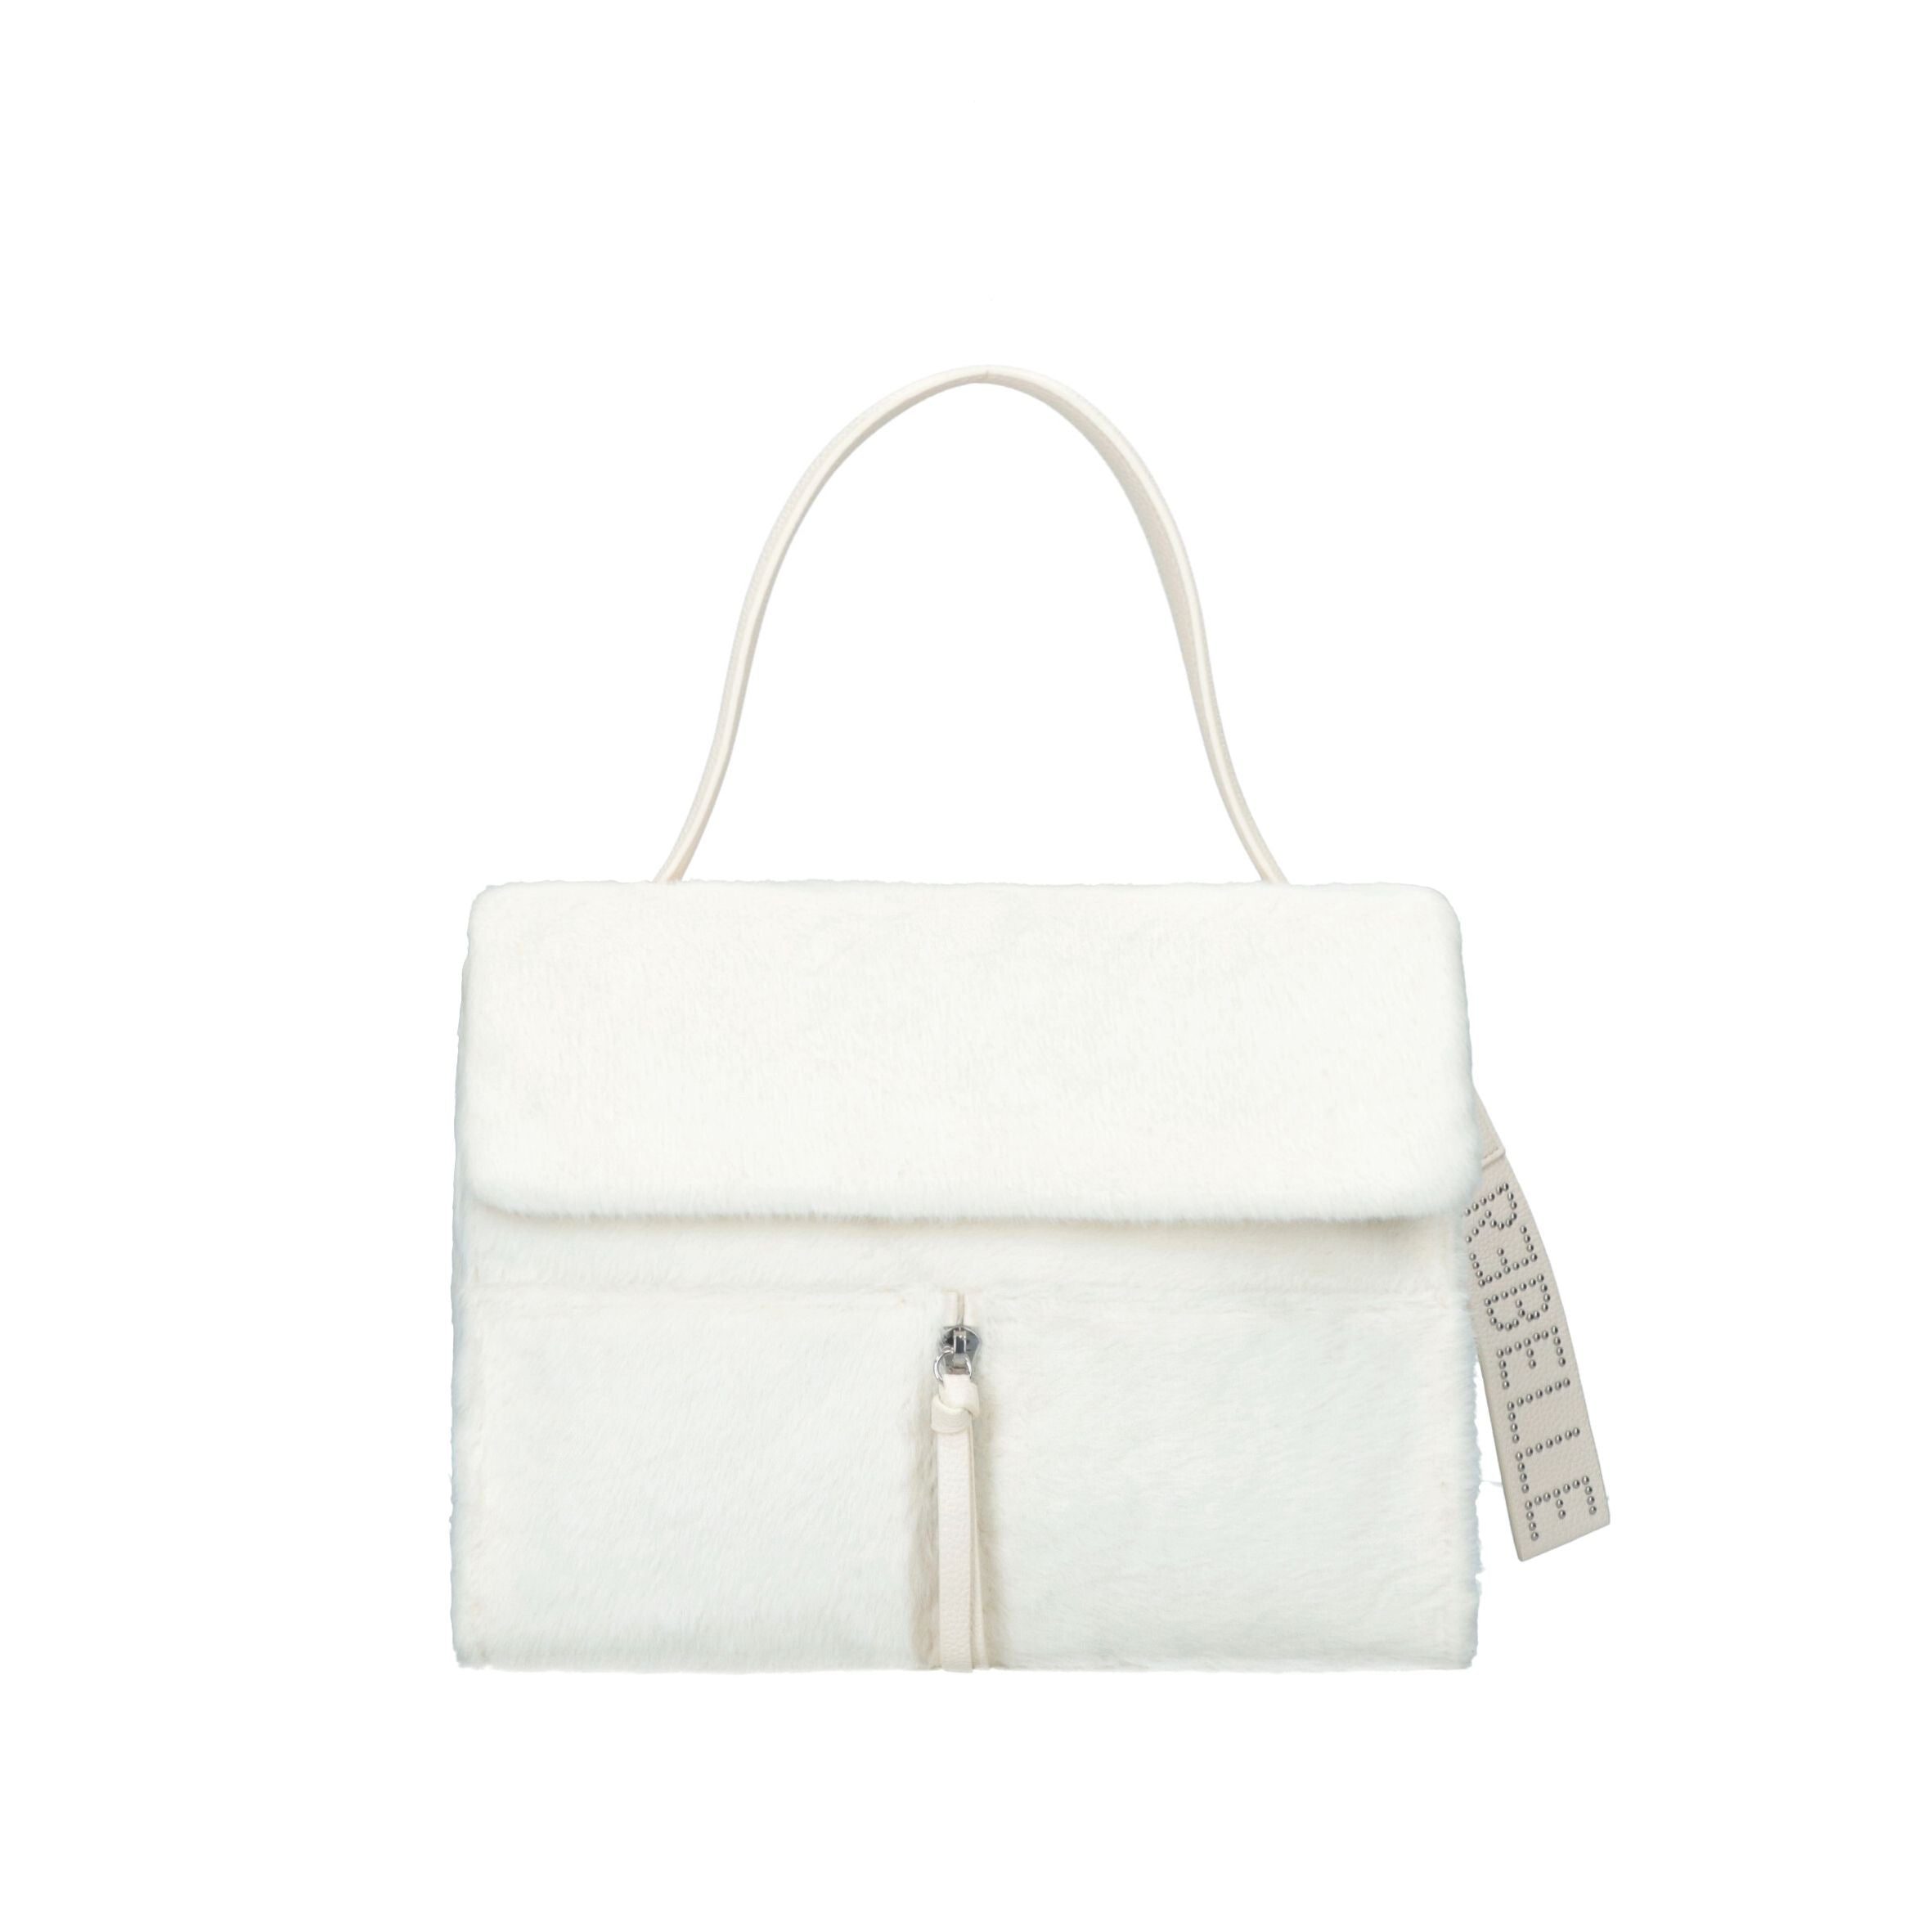 CLIO REBELLE SOFTLY FUR bag - BUTTER